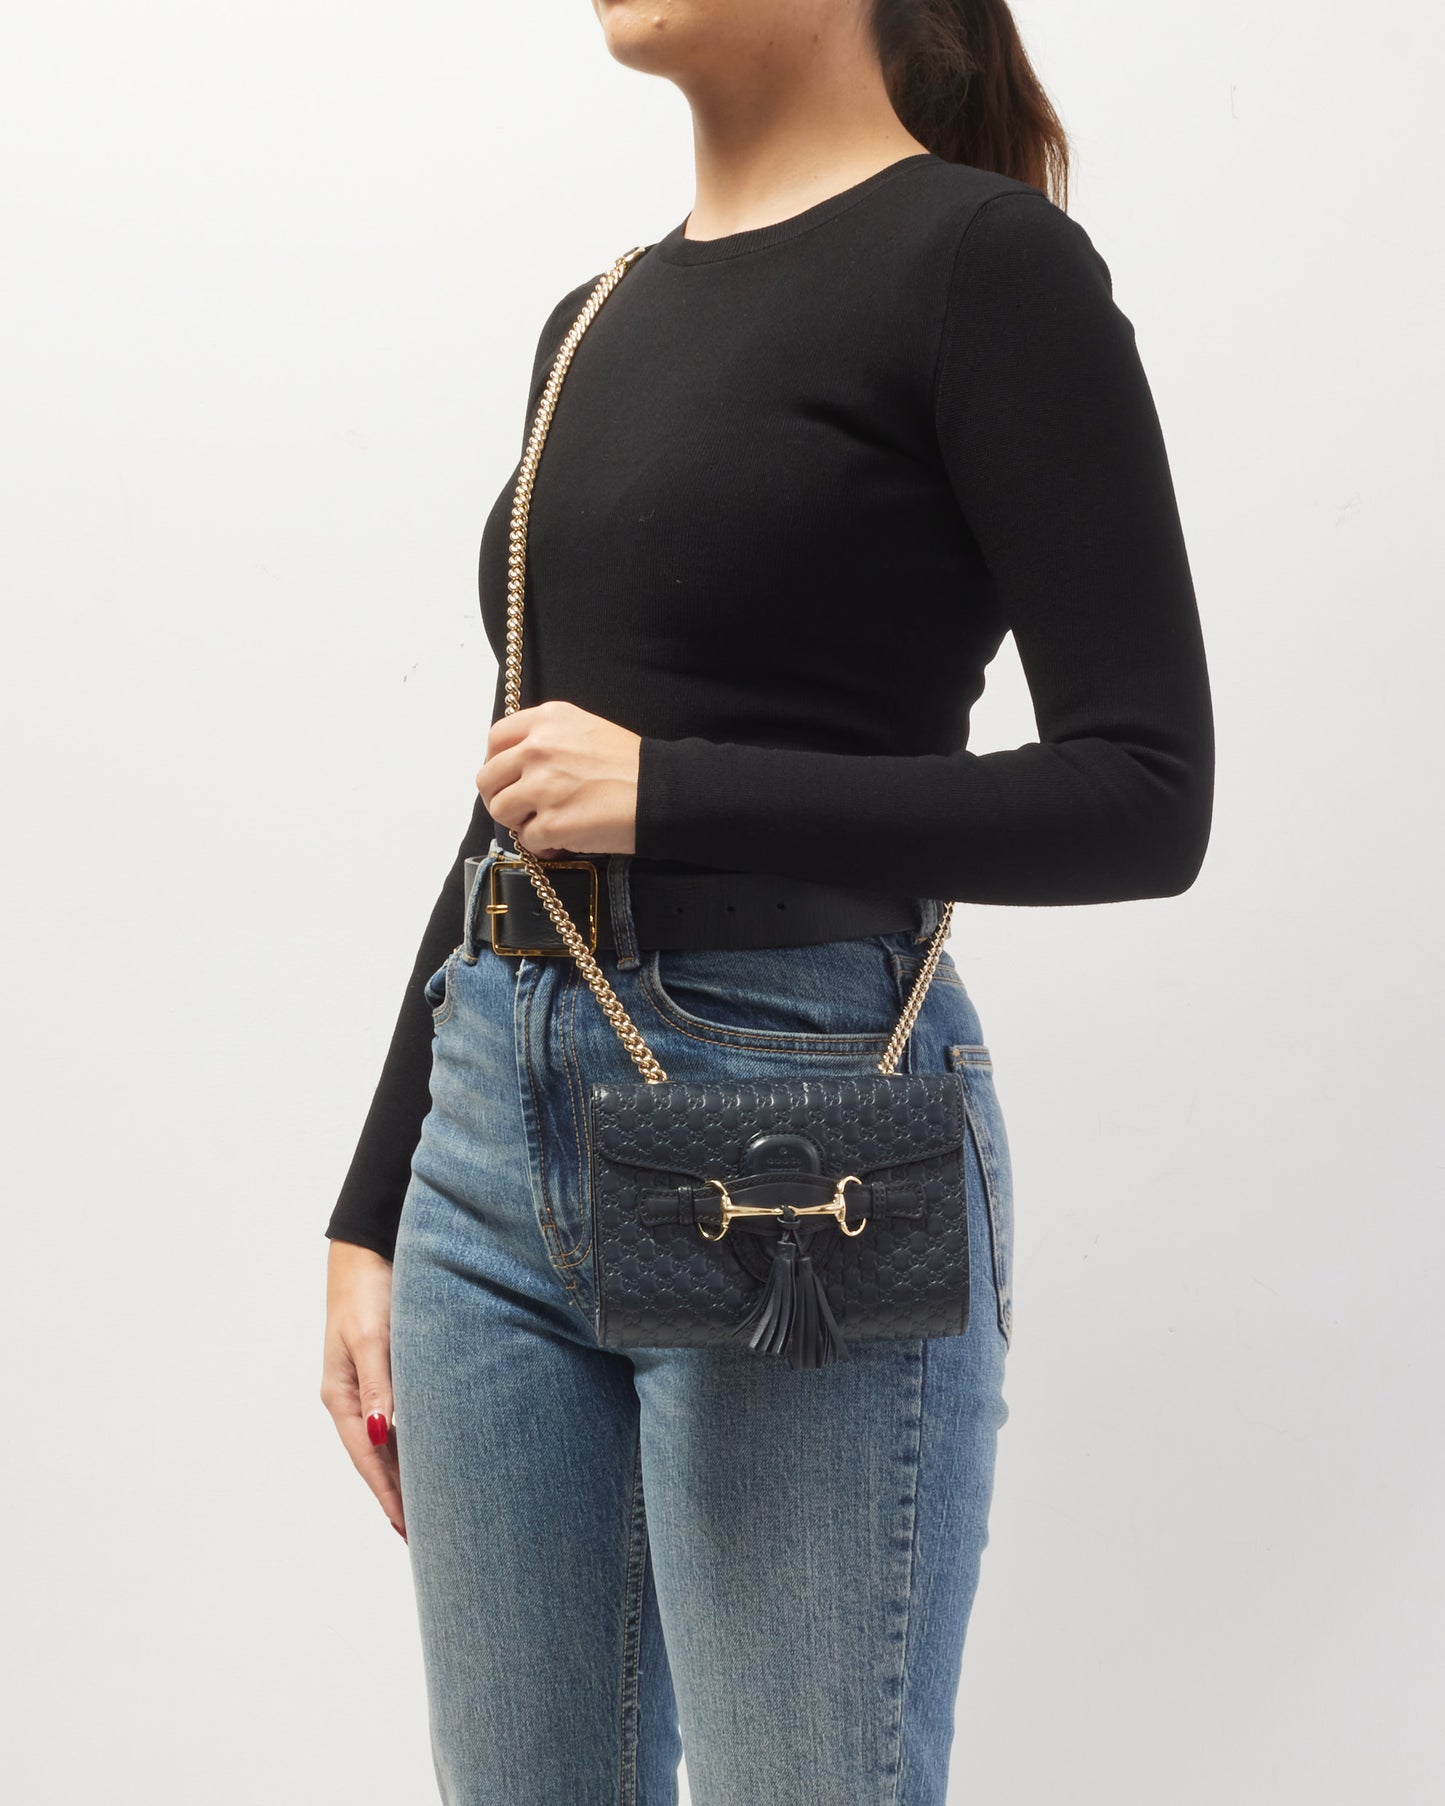 Gucci Navy Guccissima Leather Emily Chain Crossbody Bag